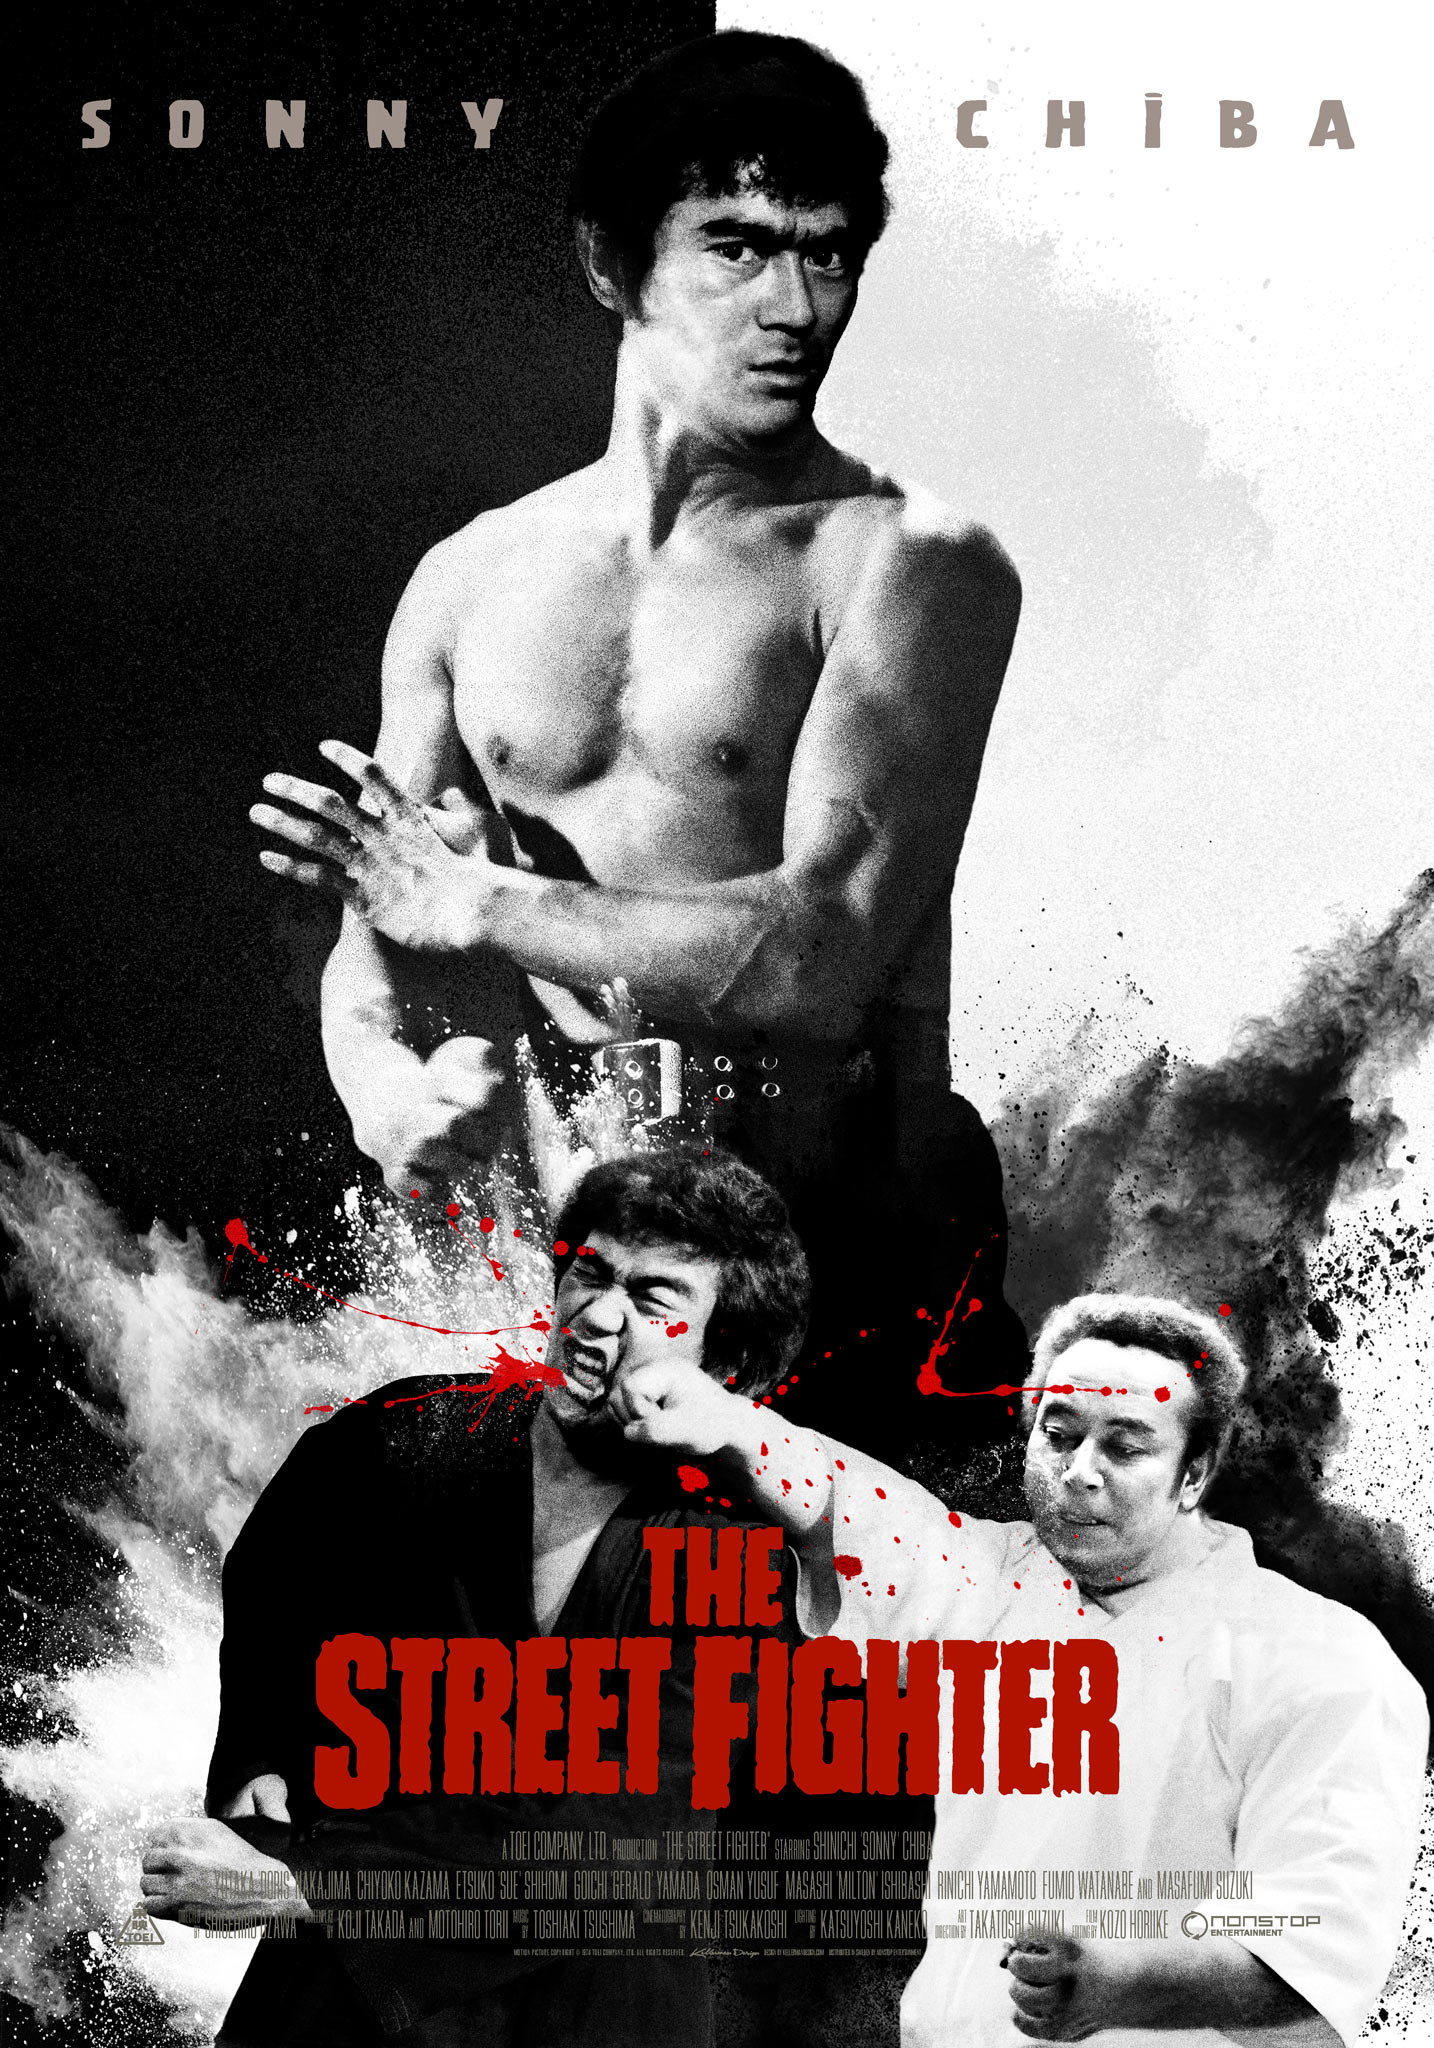 The Street Fighter (1974) theatrical onesheet